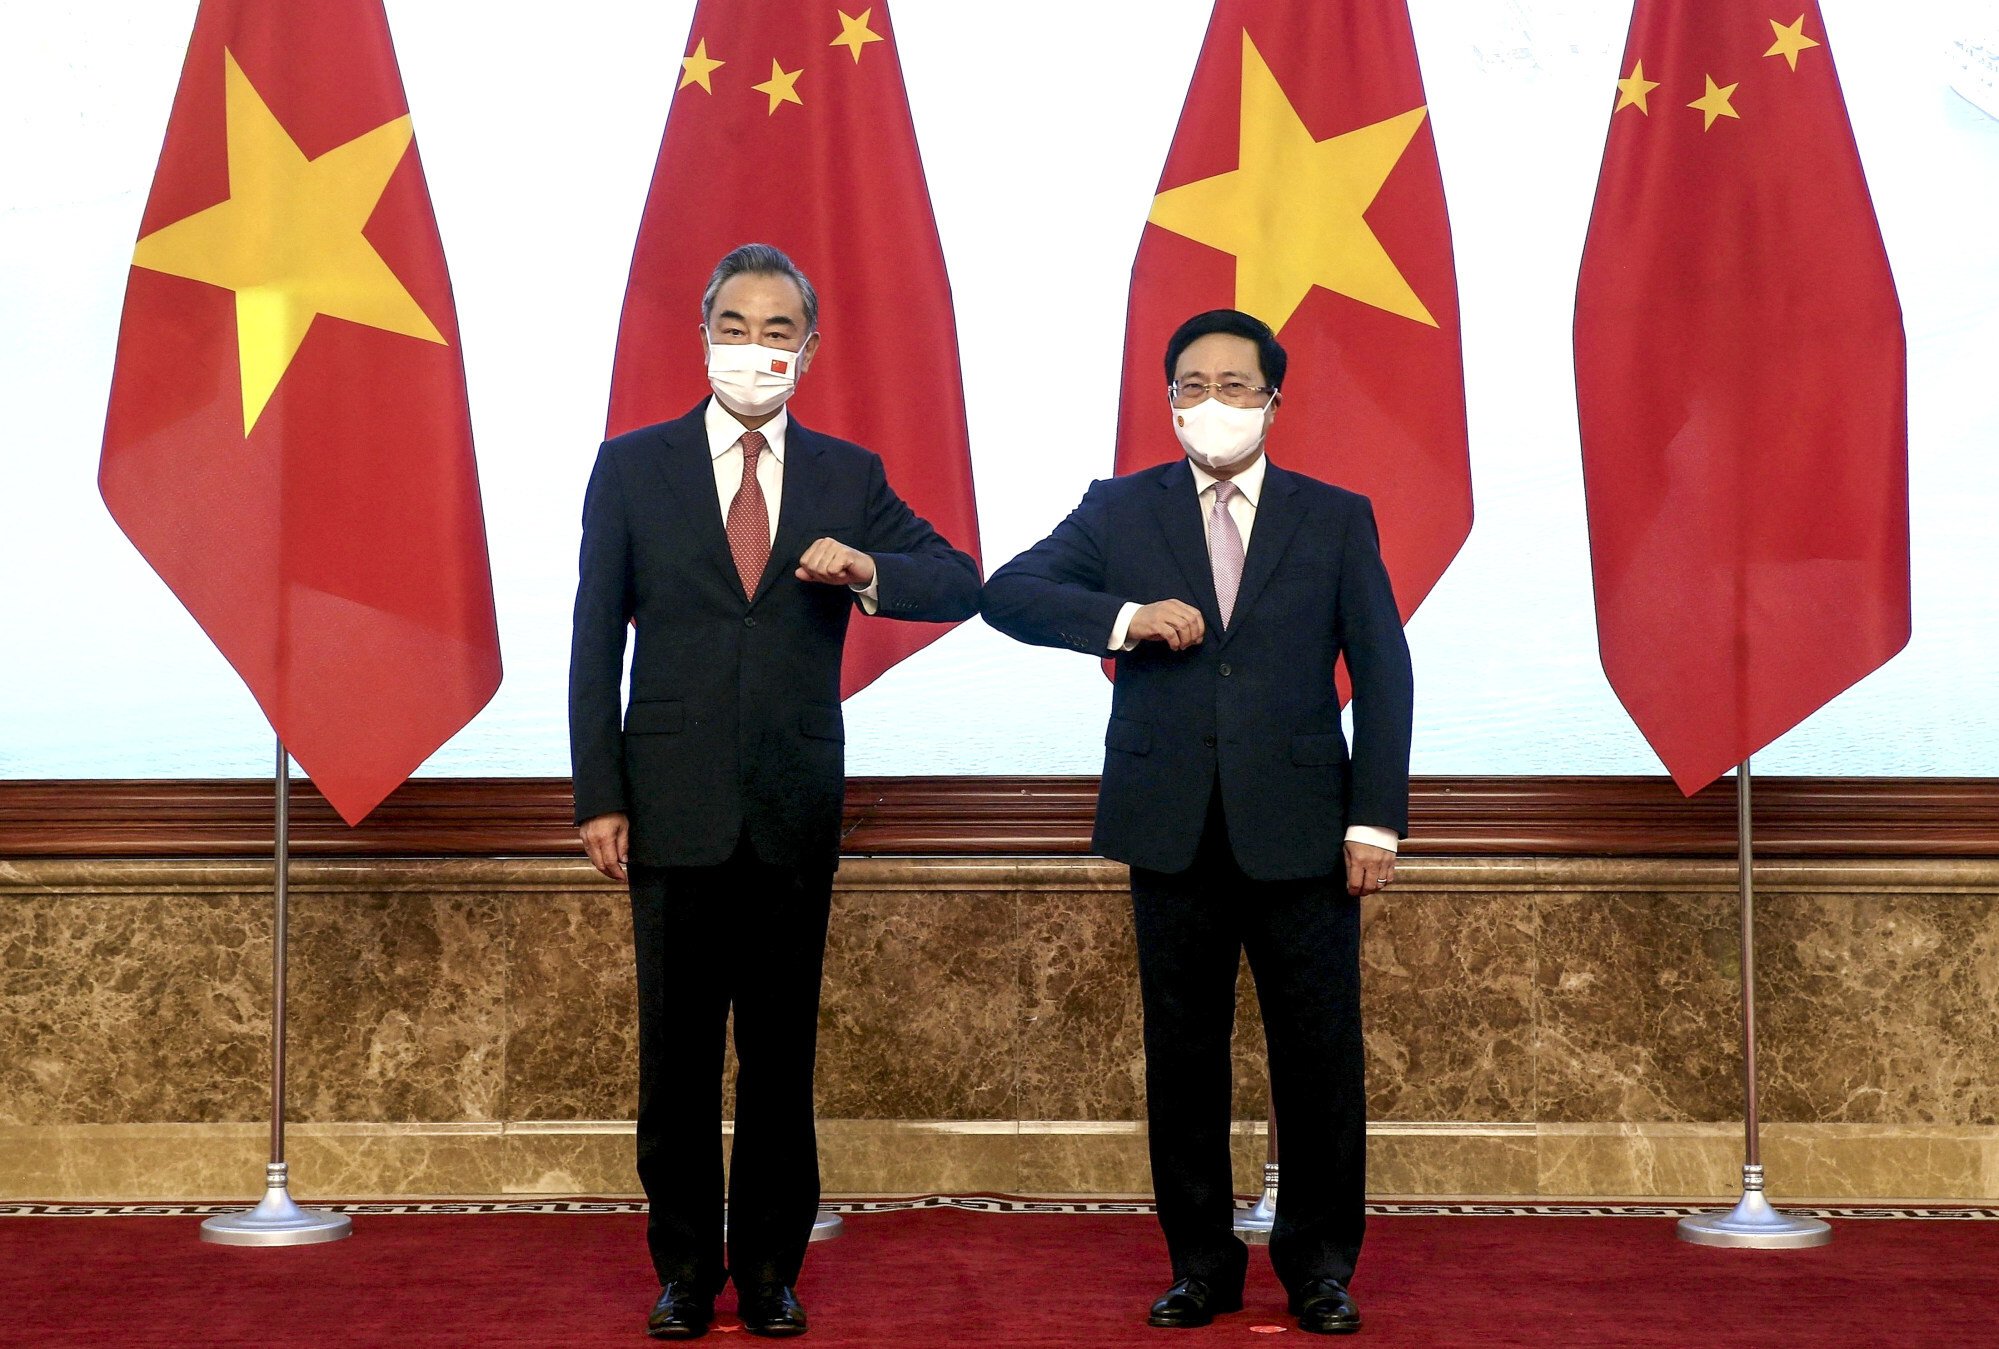 Vietnam’s Deputy Prime Minister Pham Binh Minh (right) greets visiting Chinese Foreign Minister Wang Yi with an elbow bump, ahead of their meeting in Hanoi on September 10 last year. In the span of a year, Wang has visited all 10 Asean countries. Photo: Vietnam News Agency/AFP